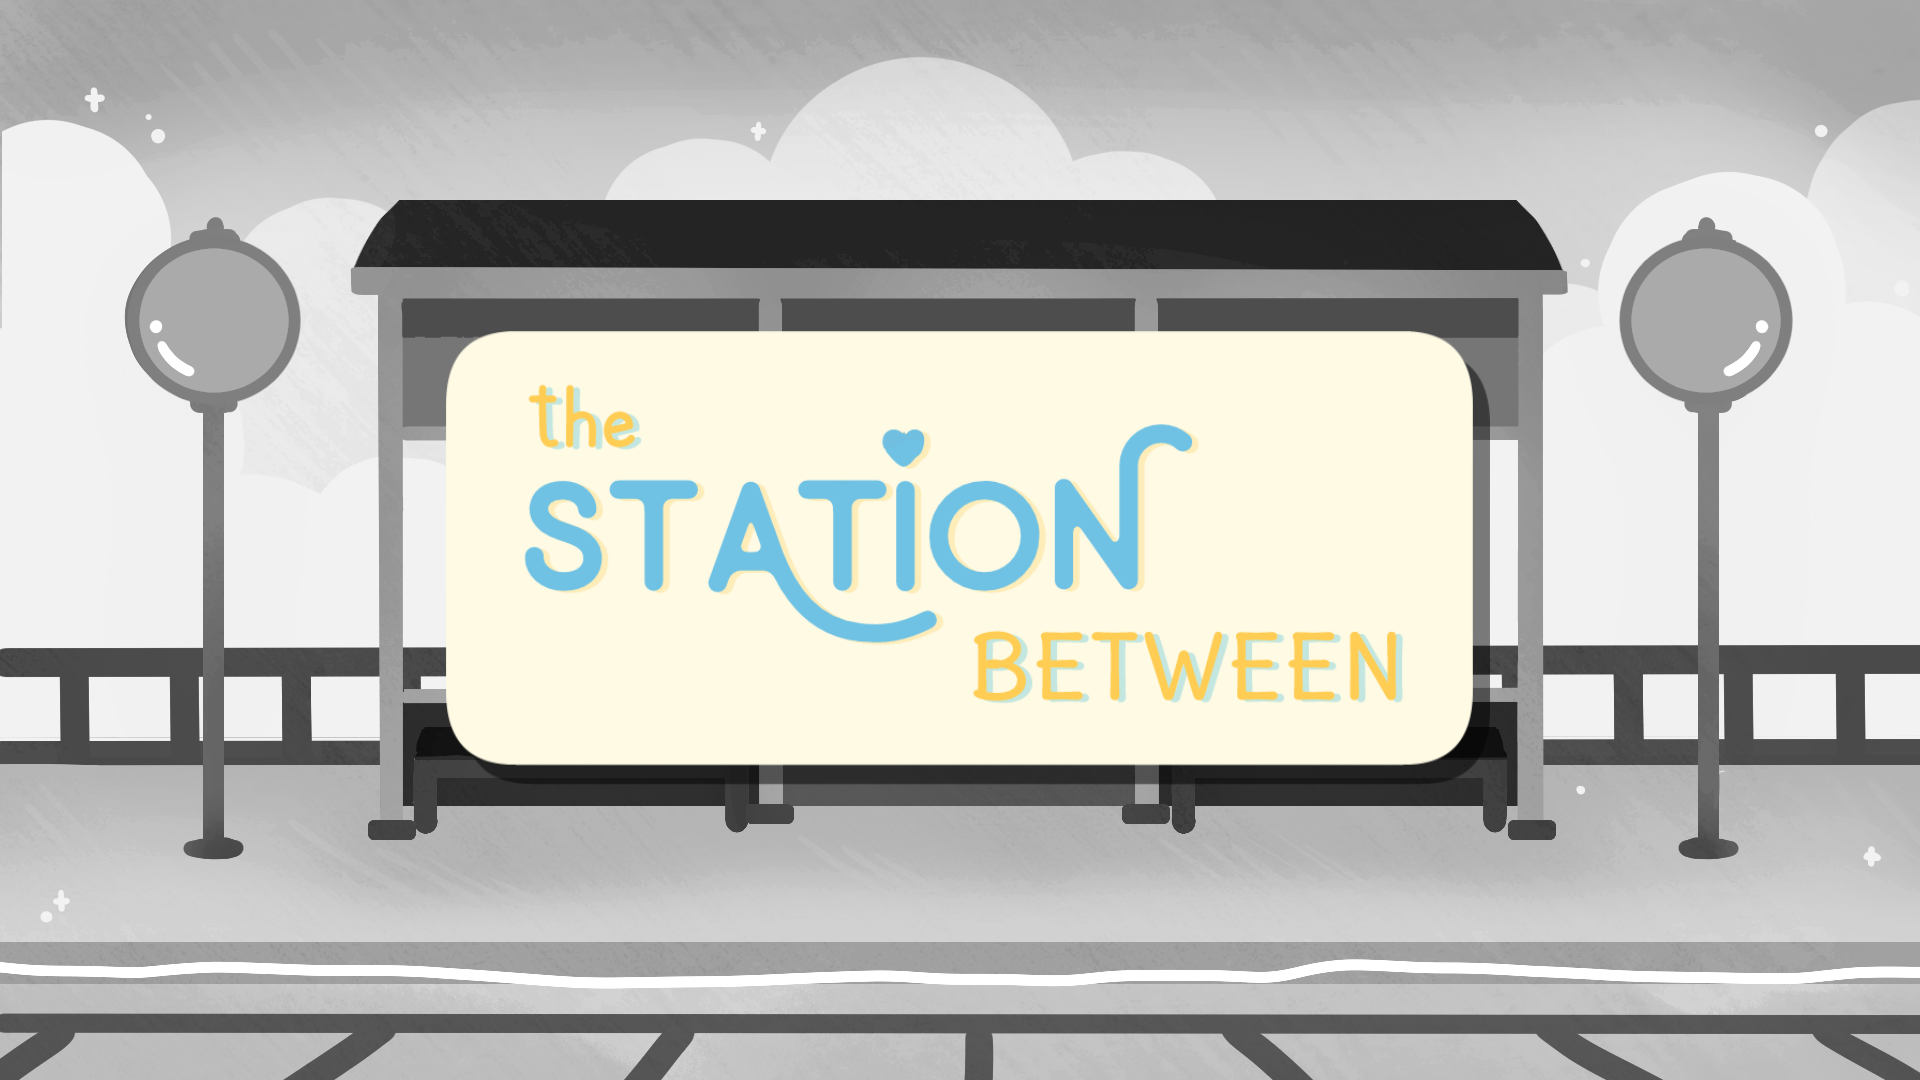 The Station Between